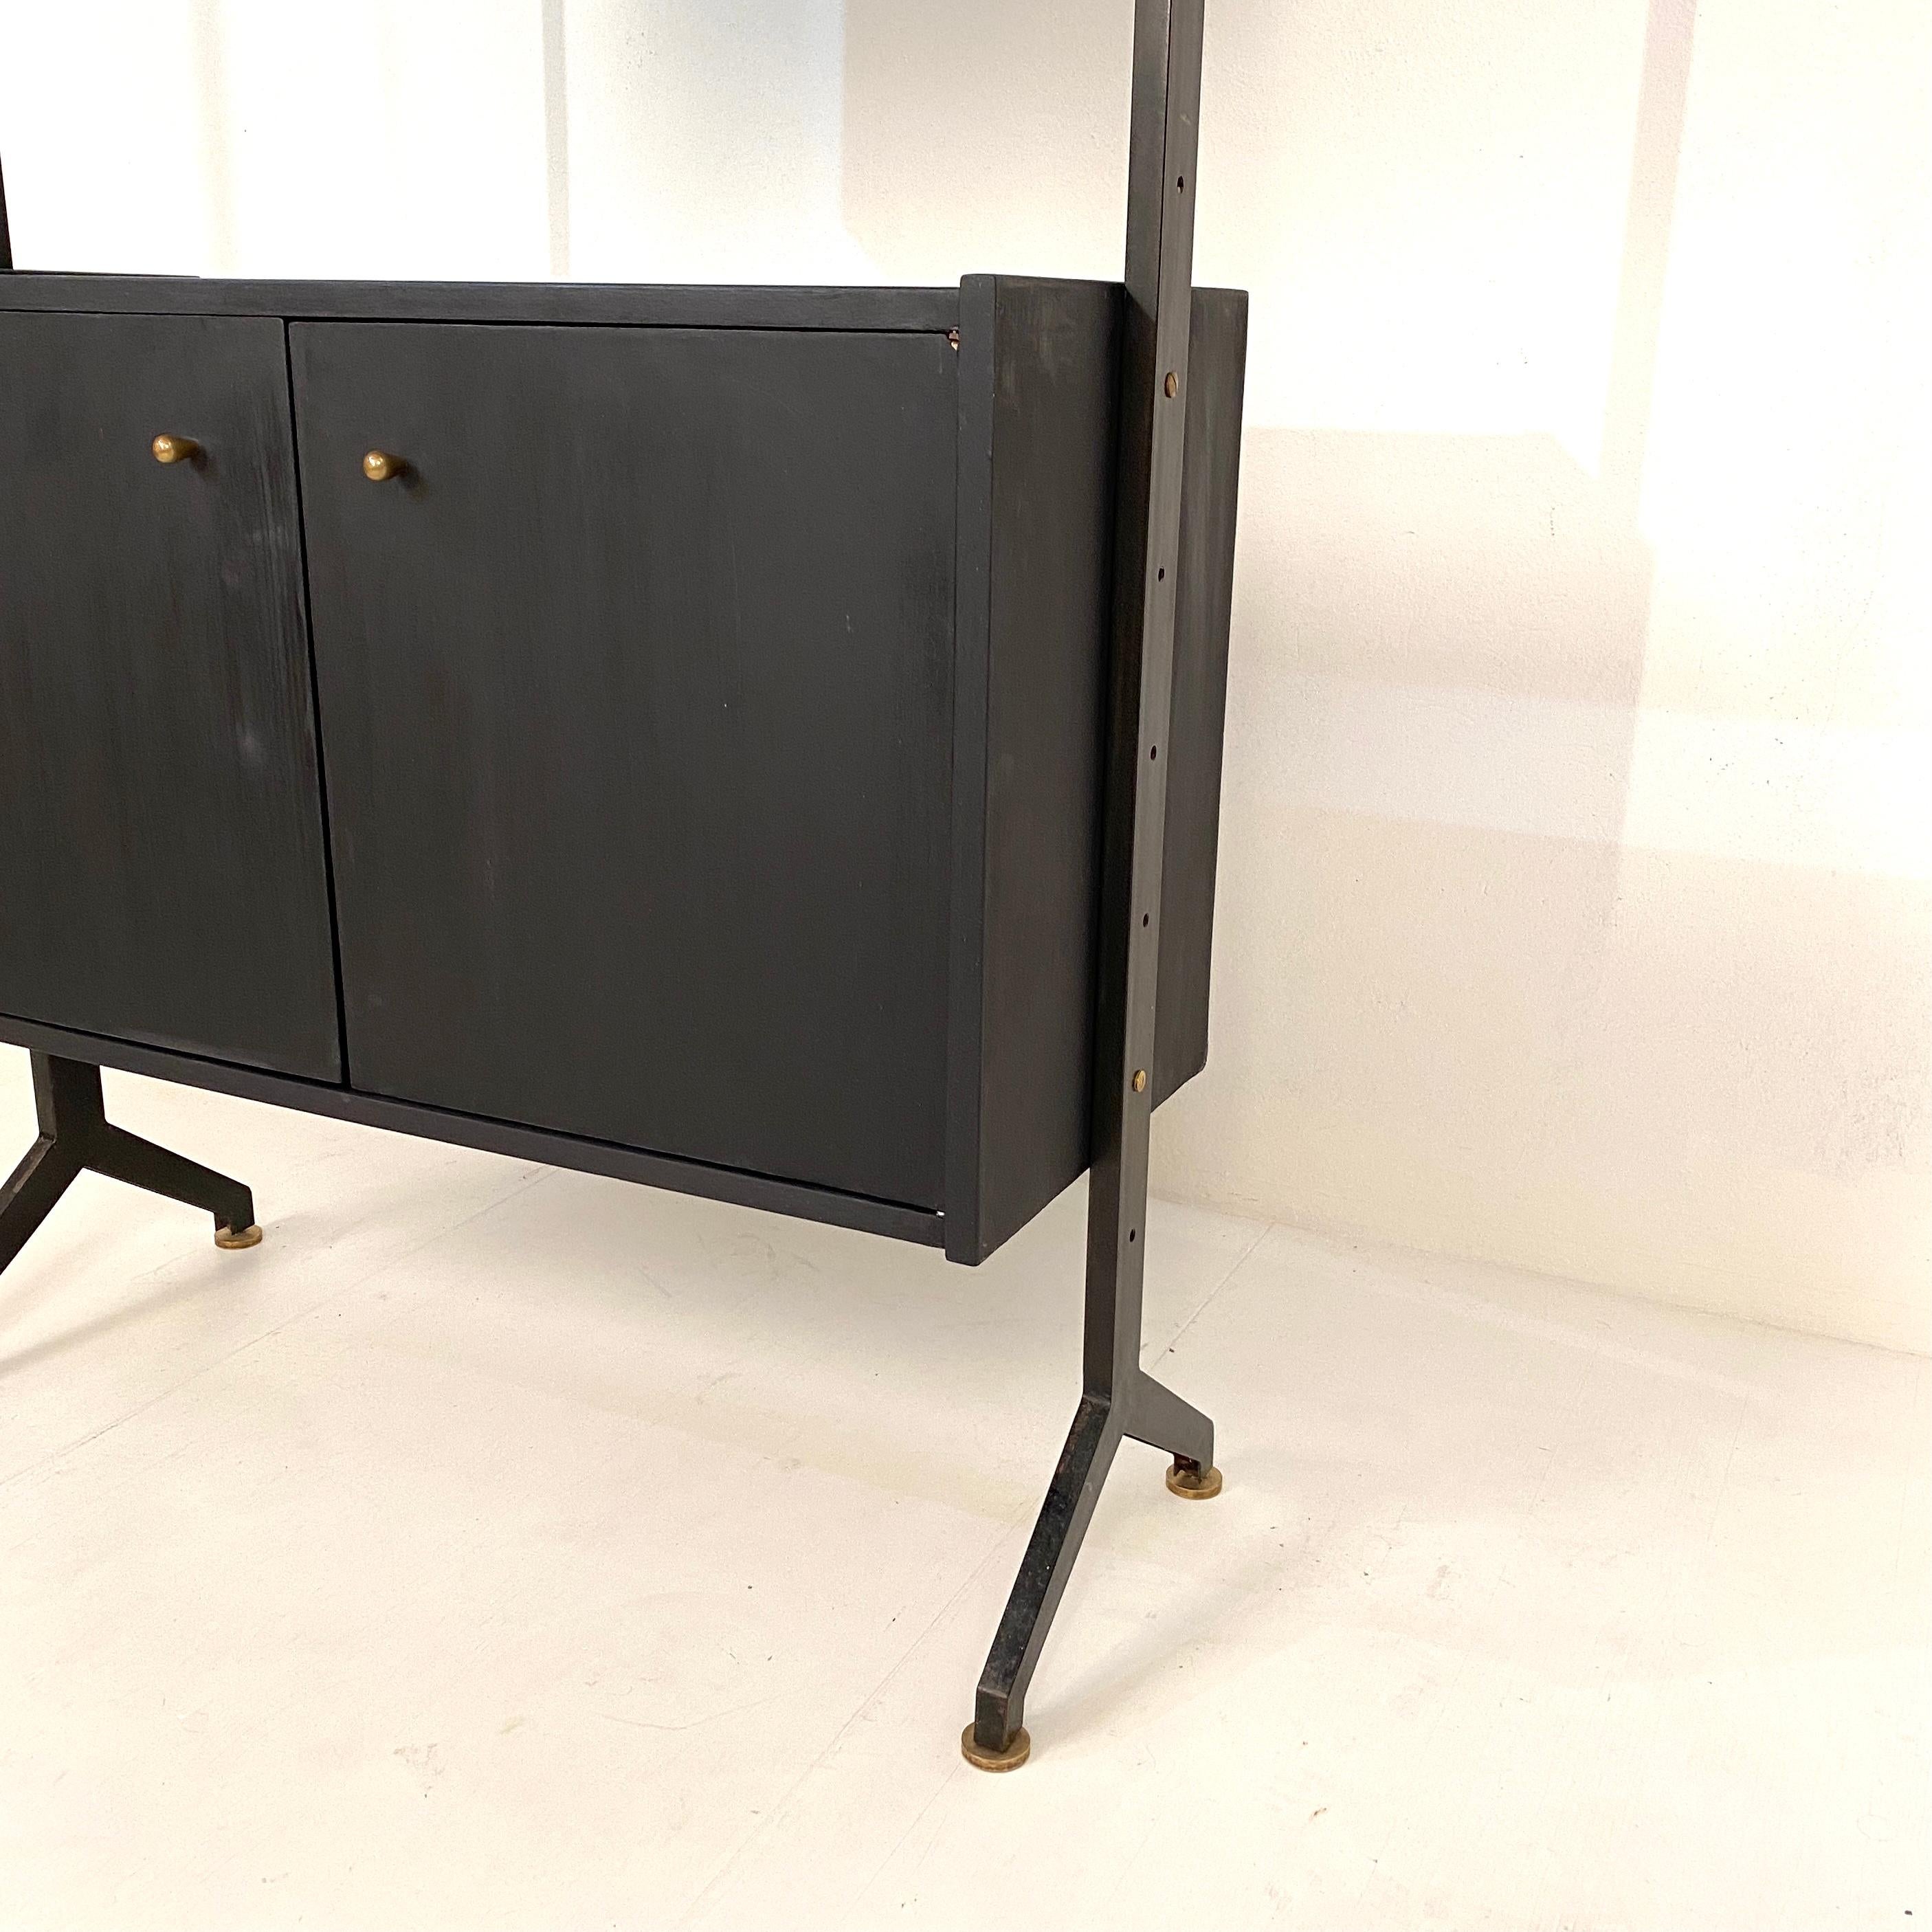 Lacquered Midcentury Black Italian Shelf or Room Divider by BR Italia Metal and Wood, 1960